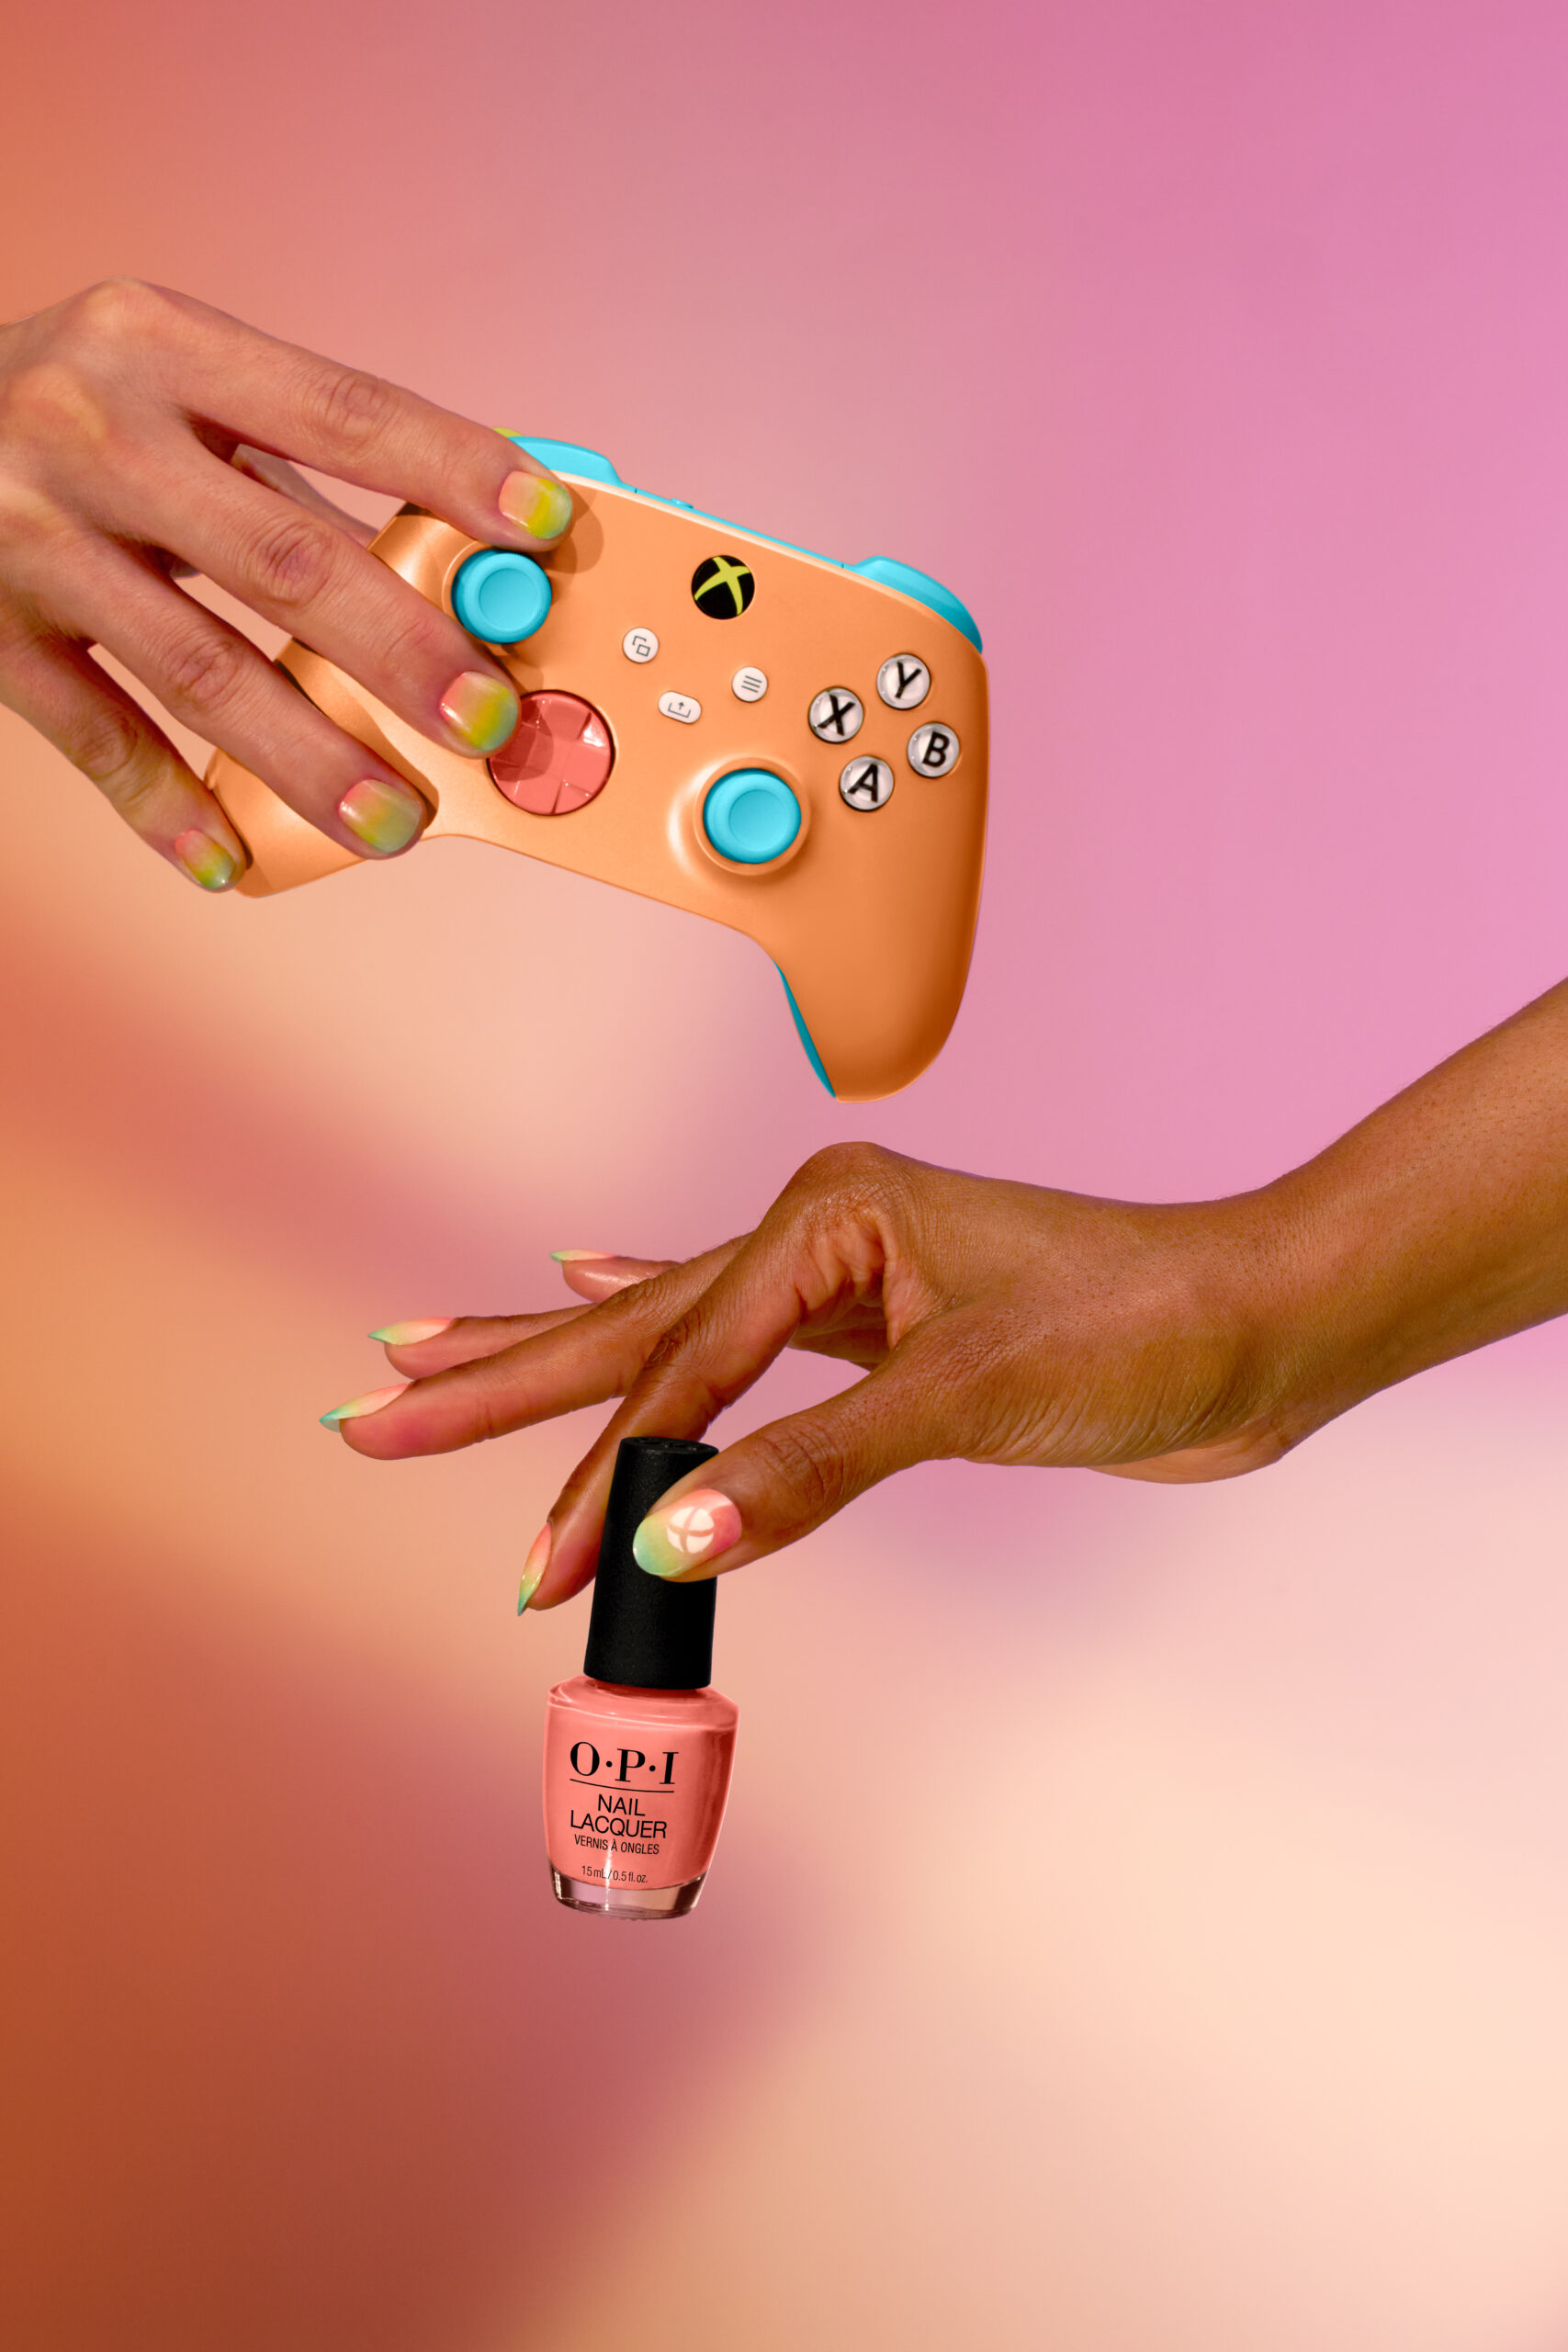 OPI And Xbox Turn Up the Heat With A New Summer Collection